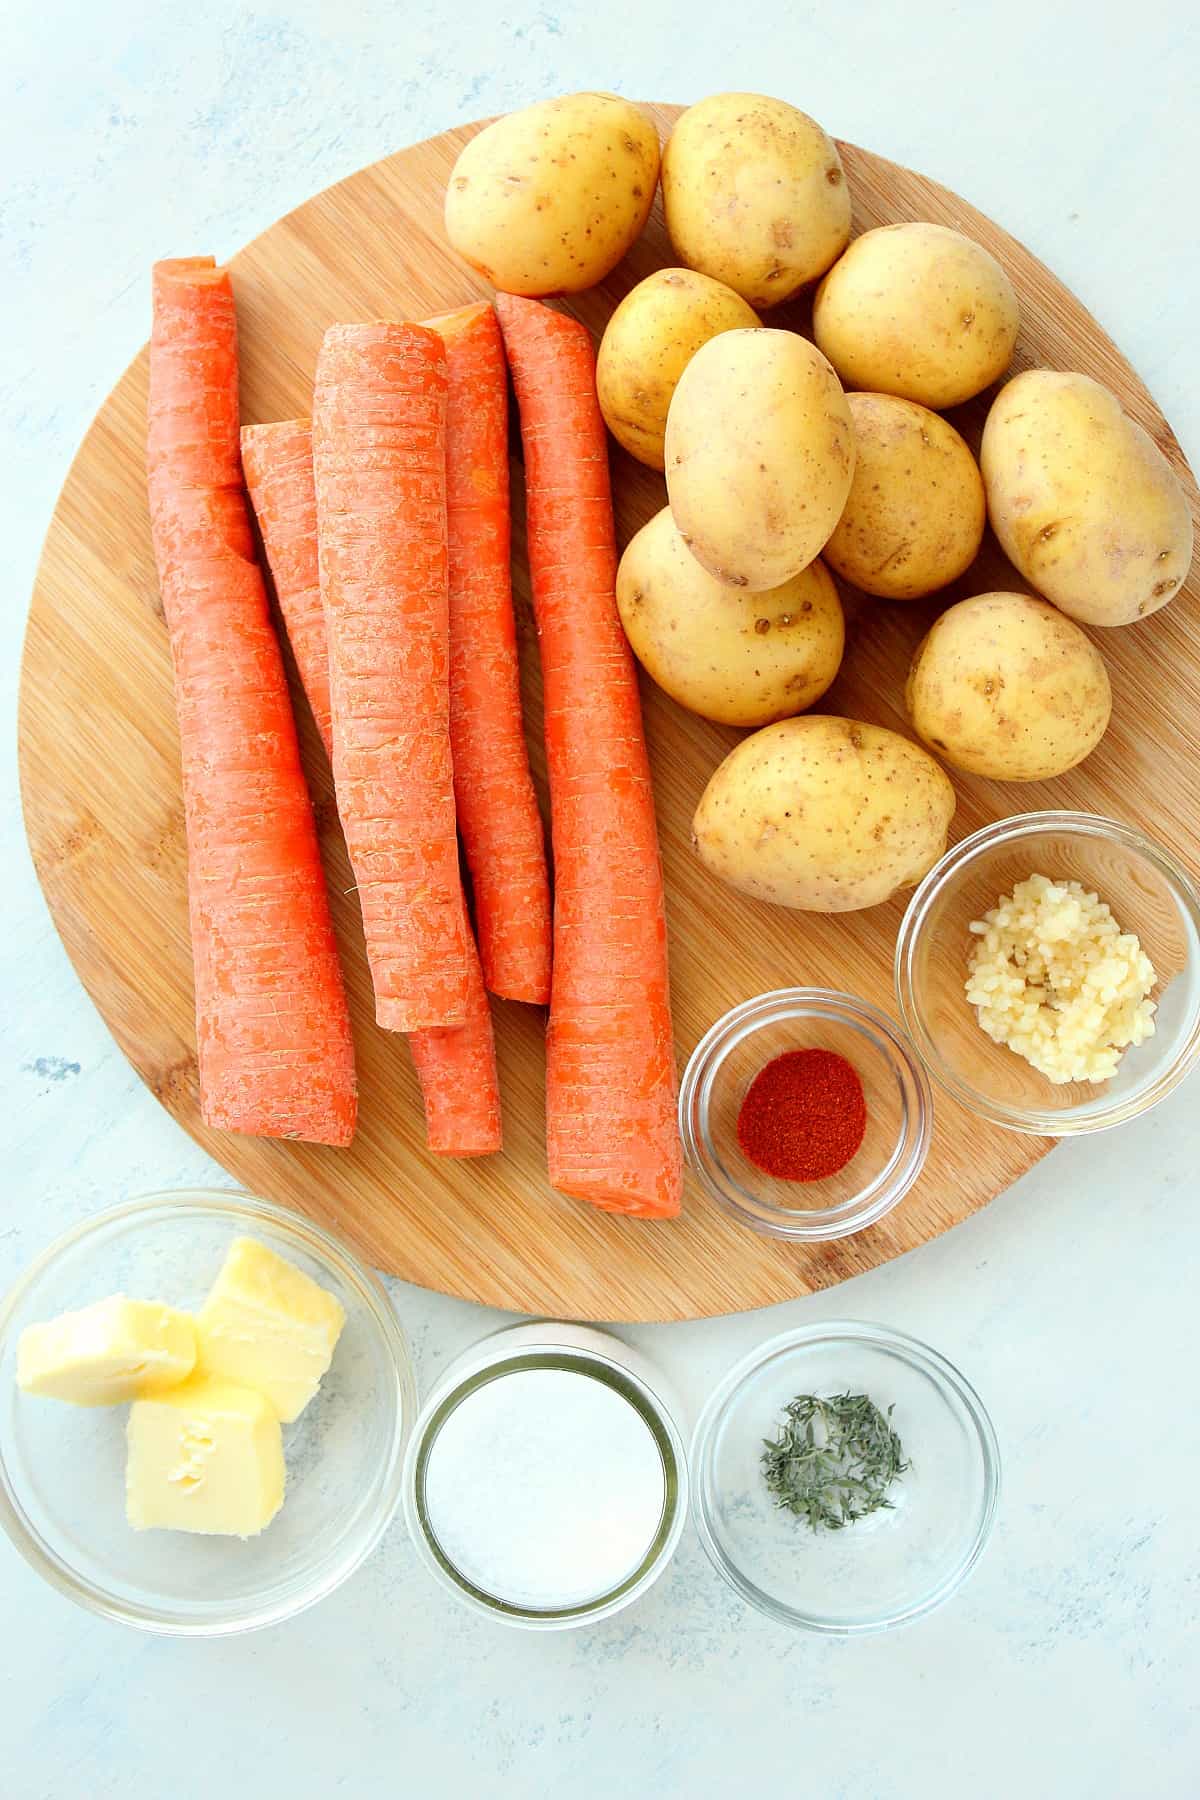 Baby potatoes and carrots on a round cutting board.